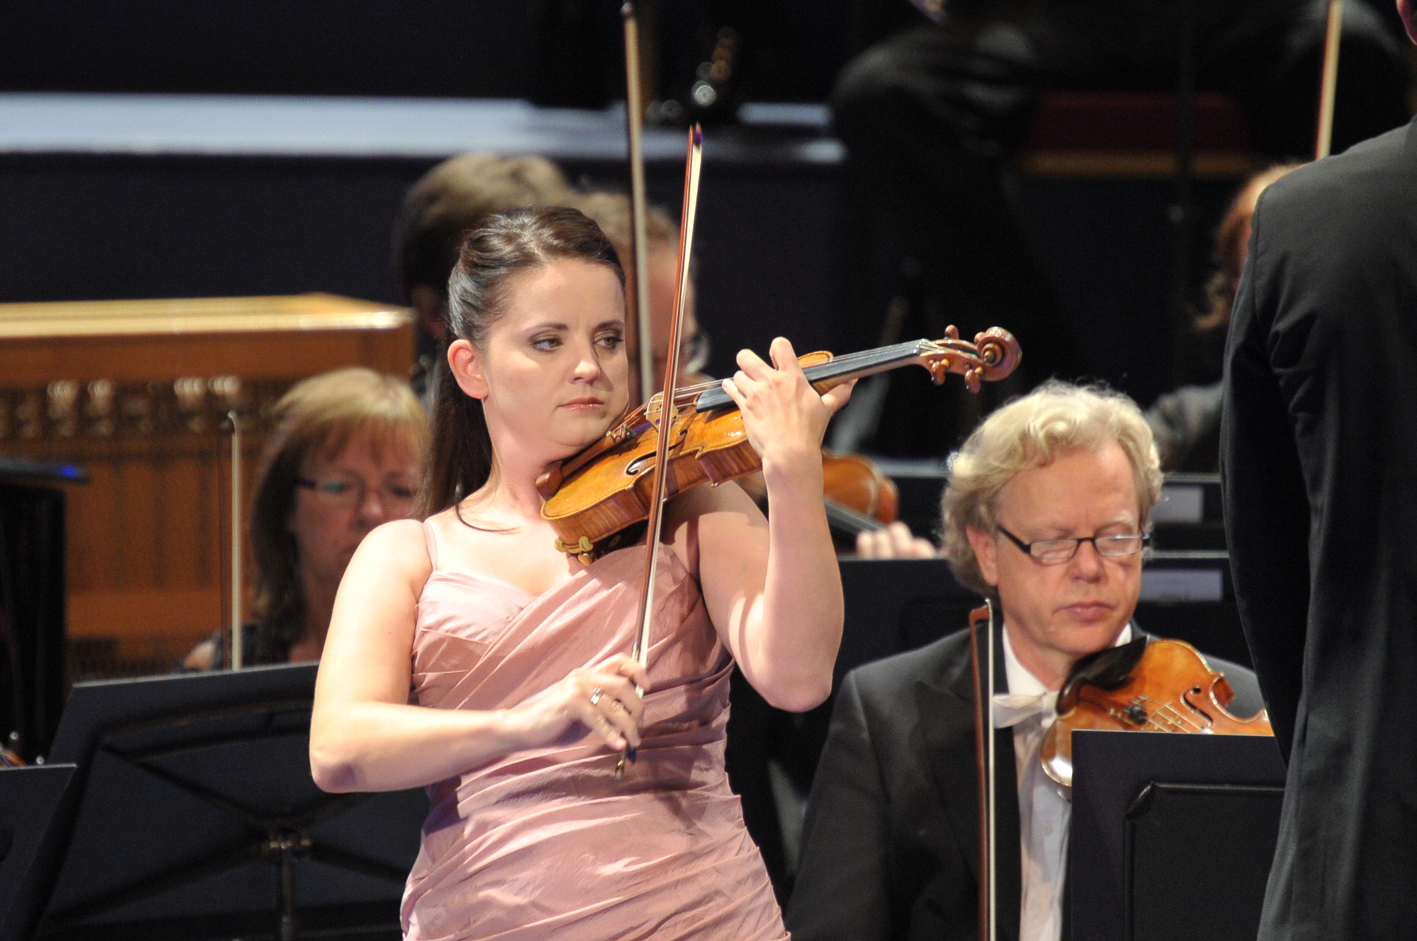 Baiba Skride at the 2013 Proms by Chris Christodoulou